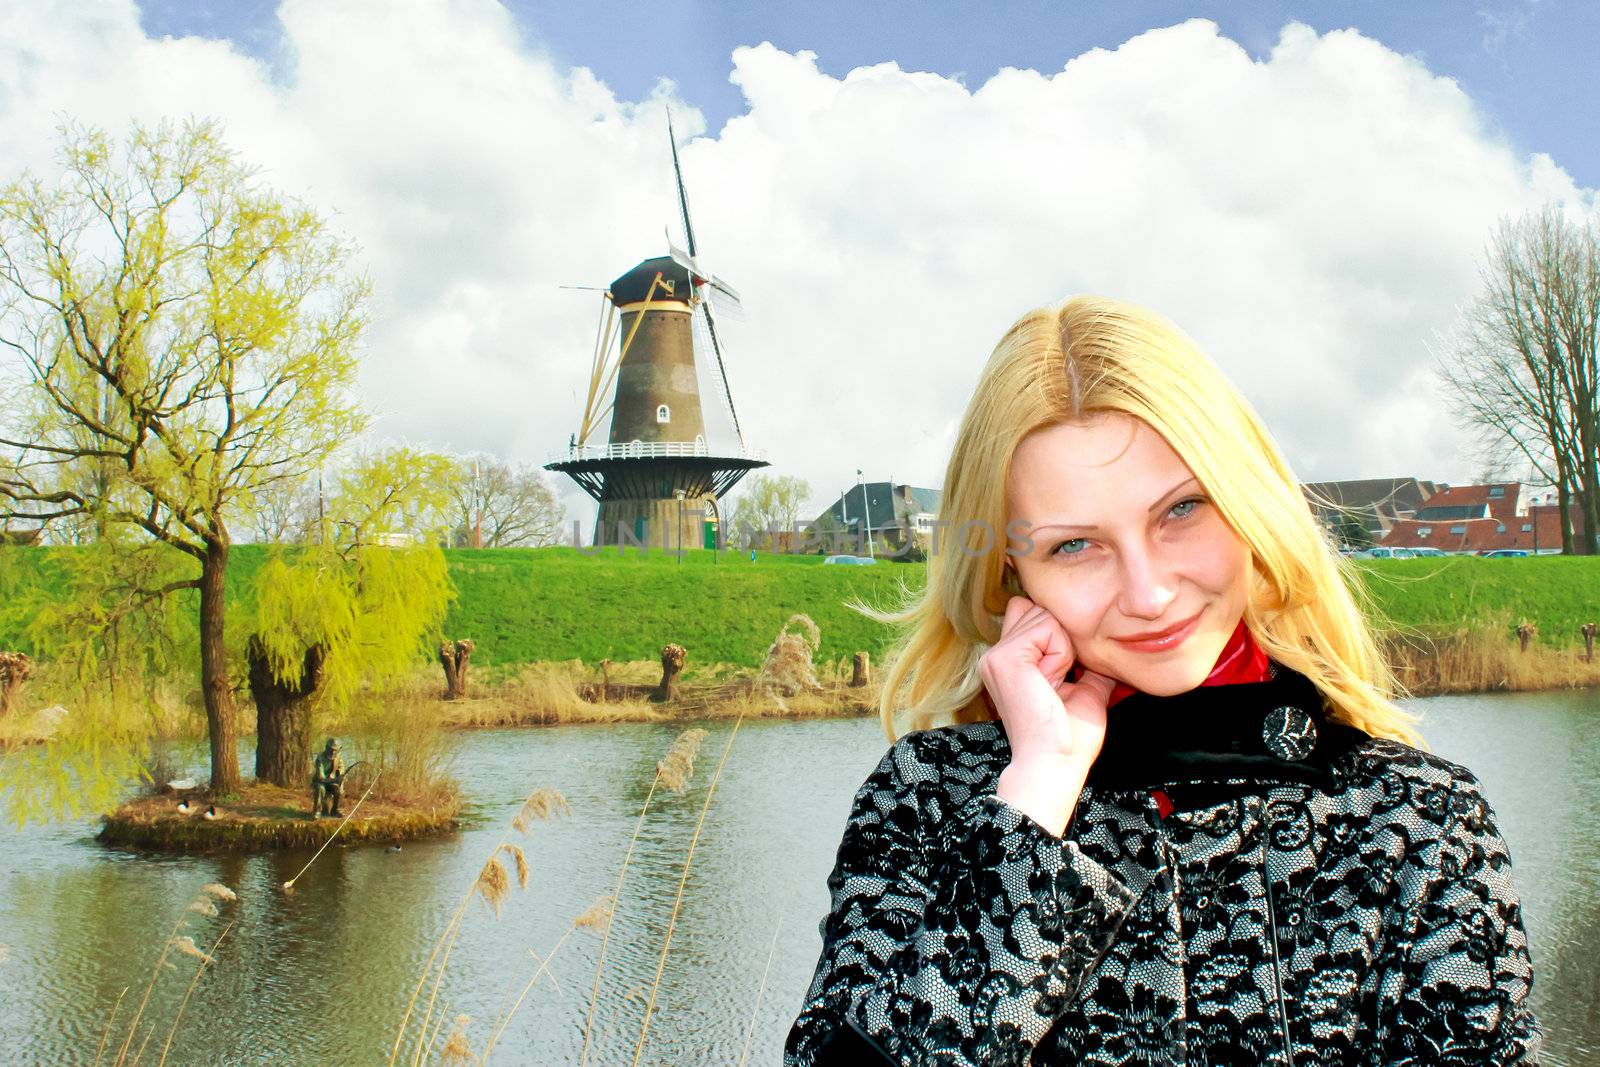 Girl on the waterfront in the Dutch town of Gorinchem. Netherlan by NickNick